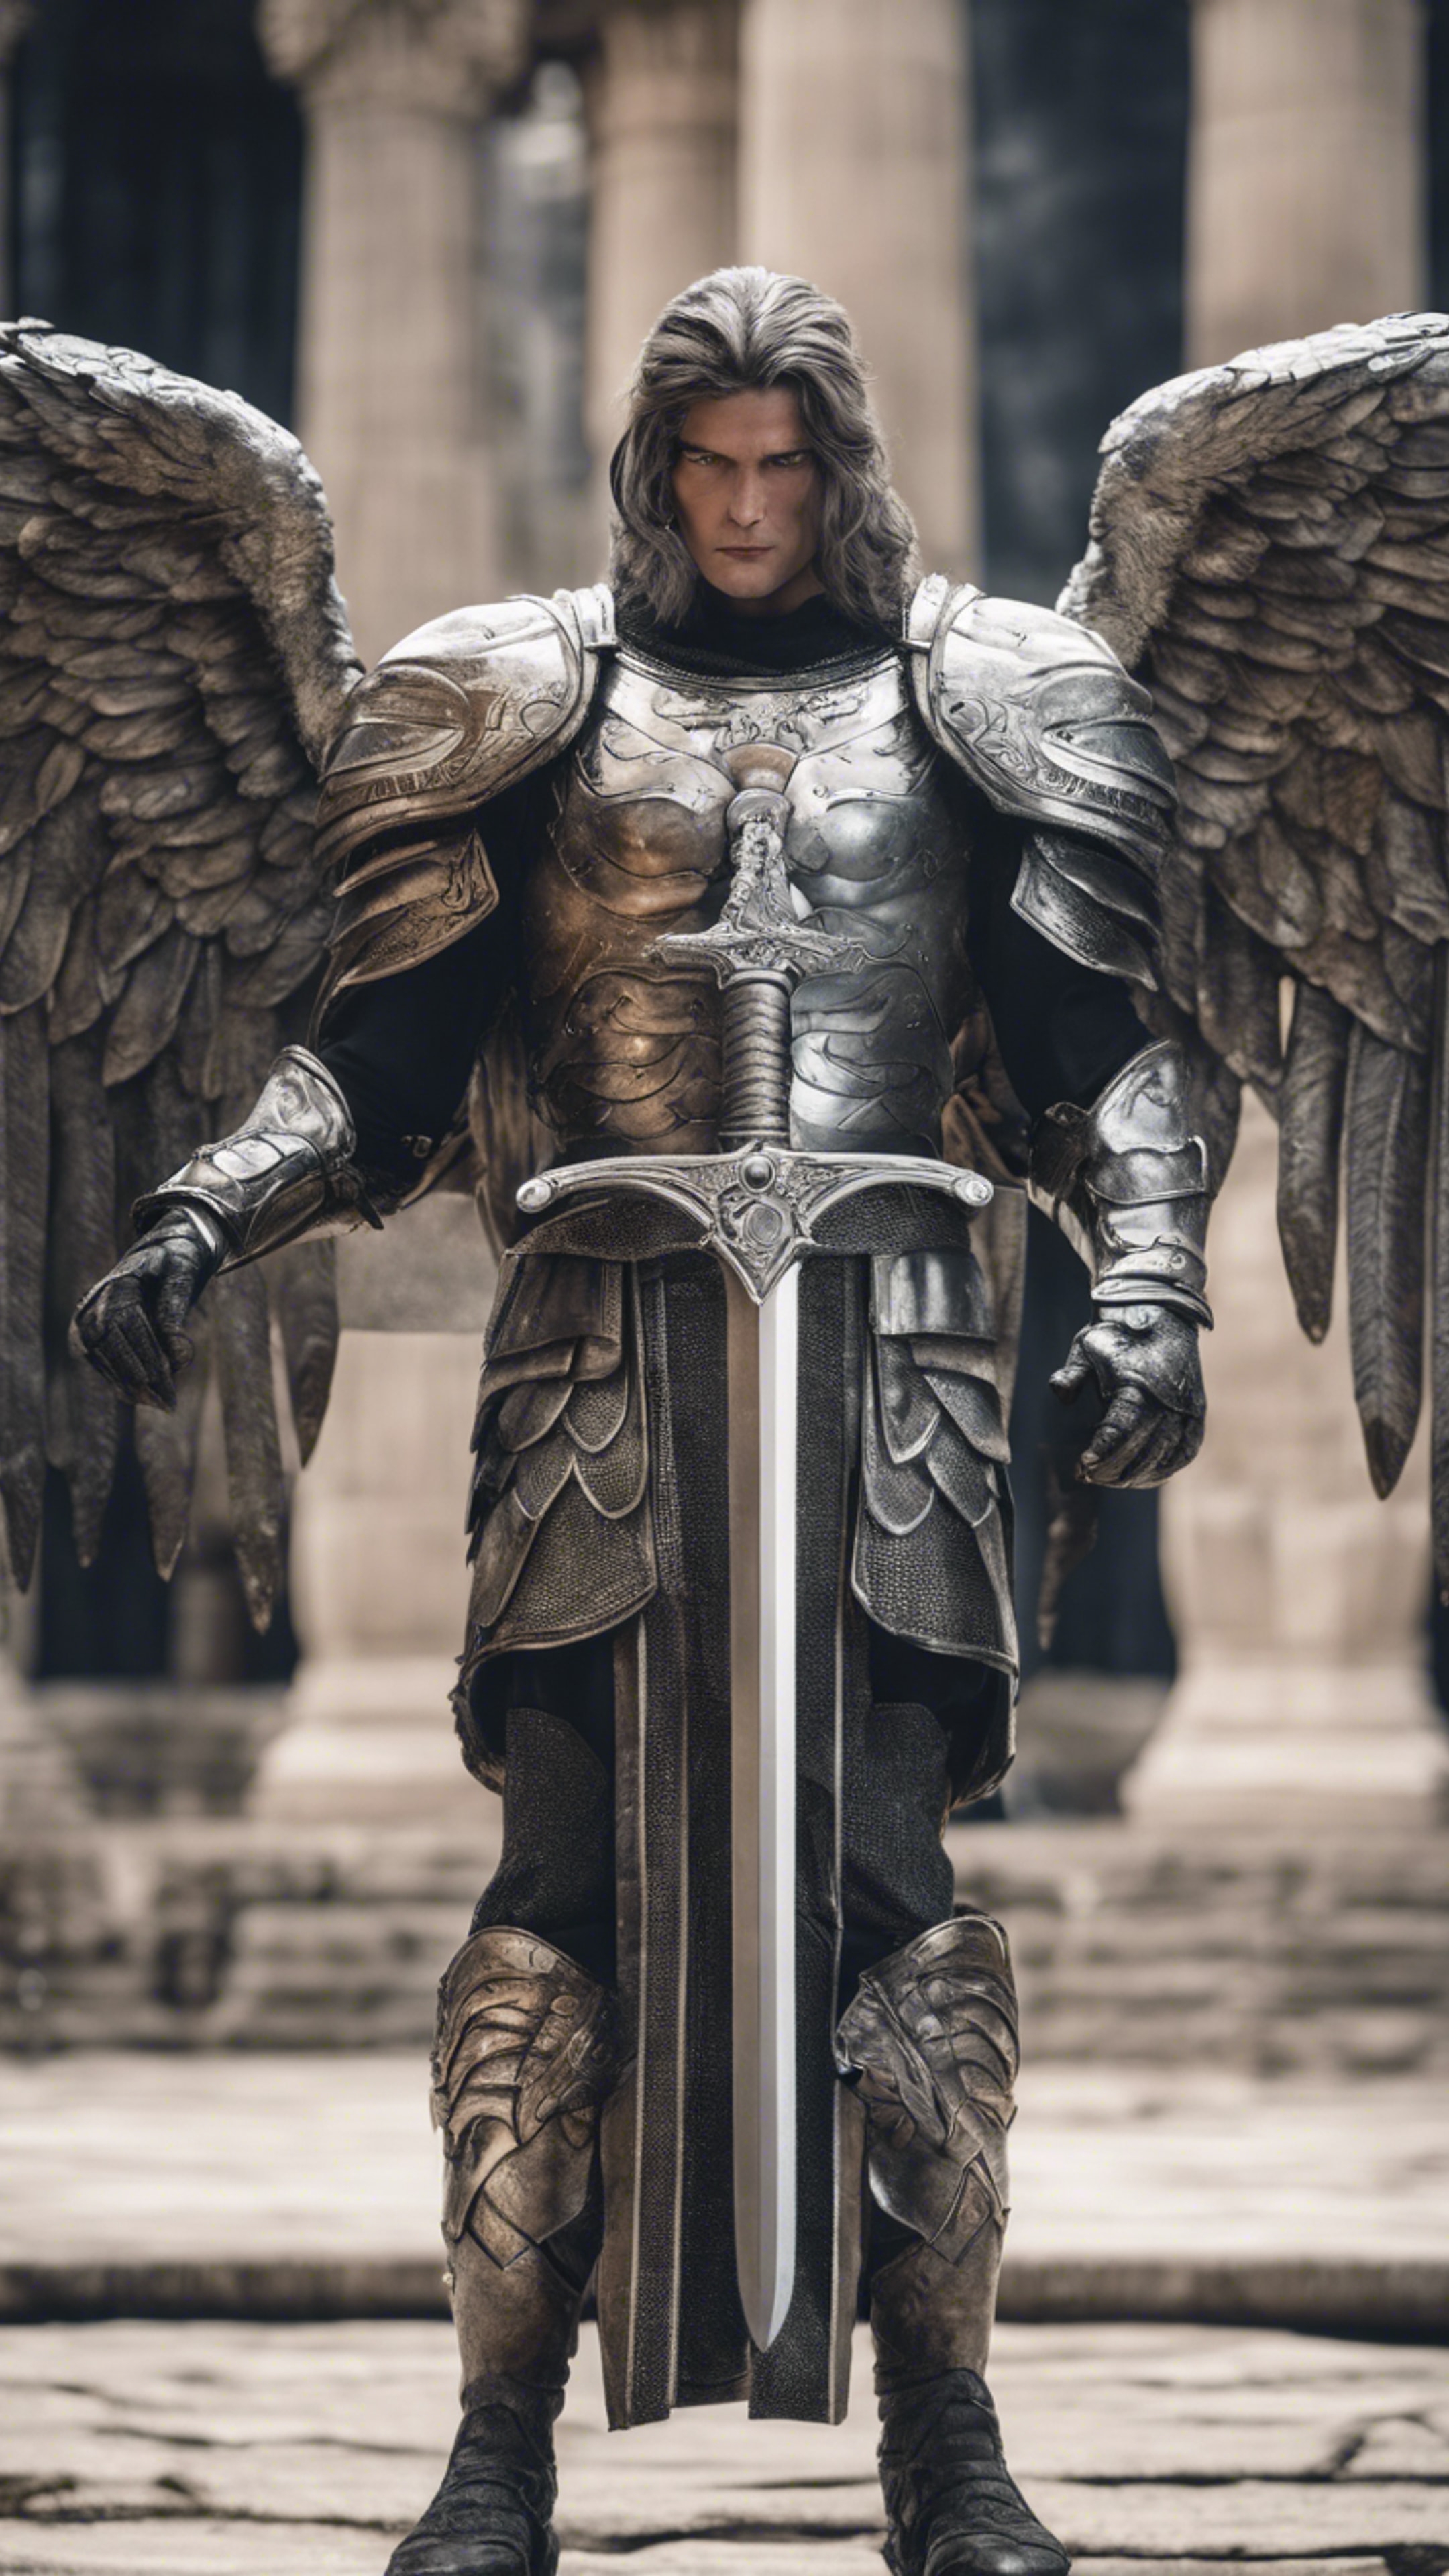 A strong archangel with a great silver sword in battle stance. Hintergrund[1419cc1cb5fd40c69a58]